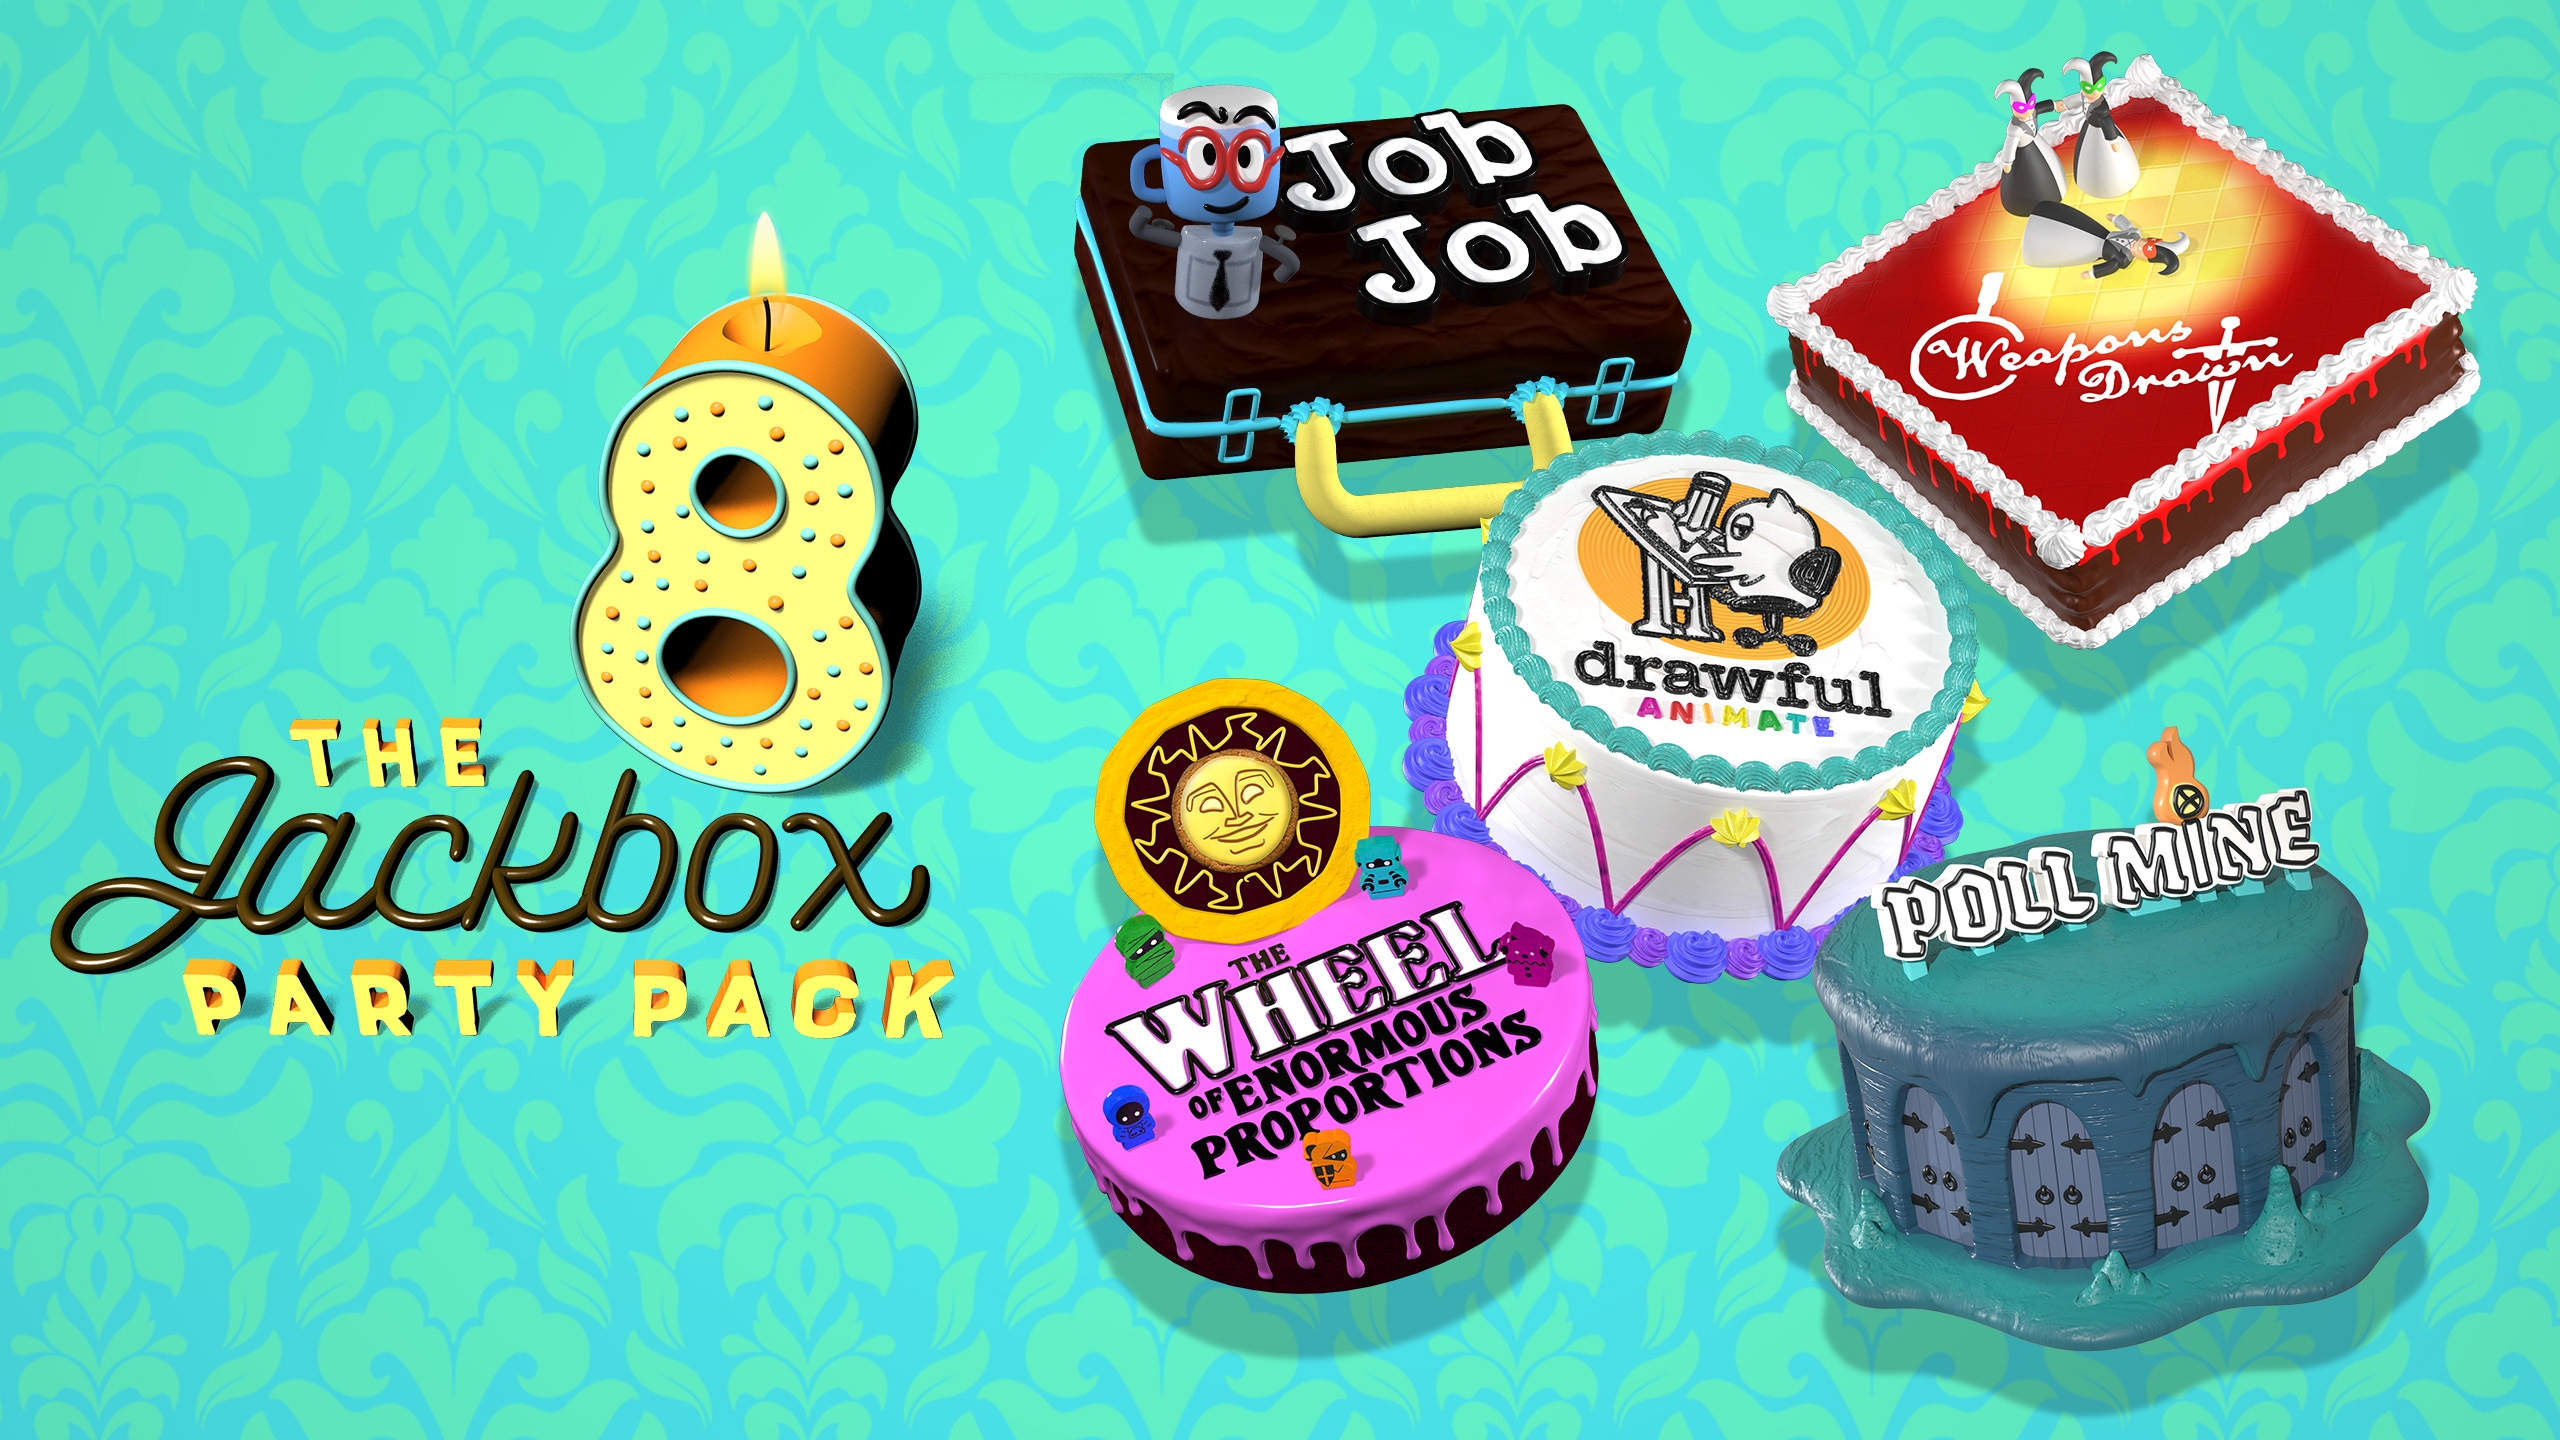 which one is the best jackbox party pack